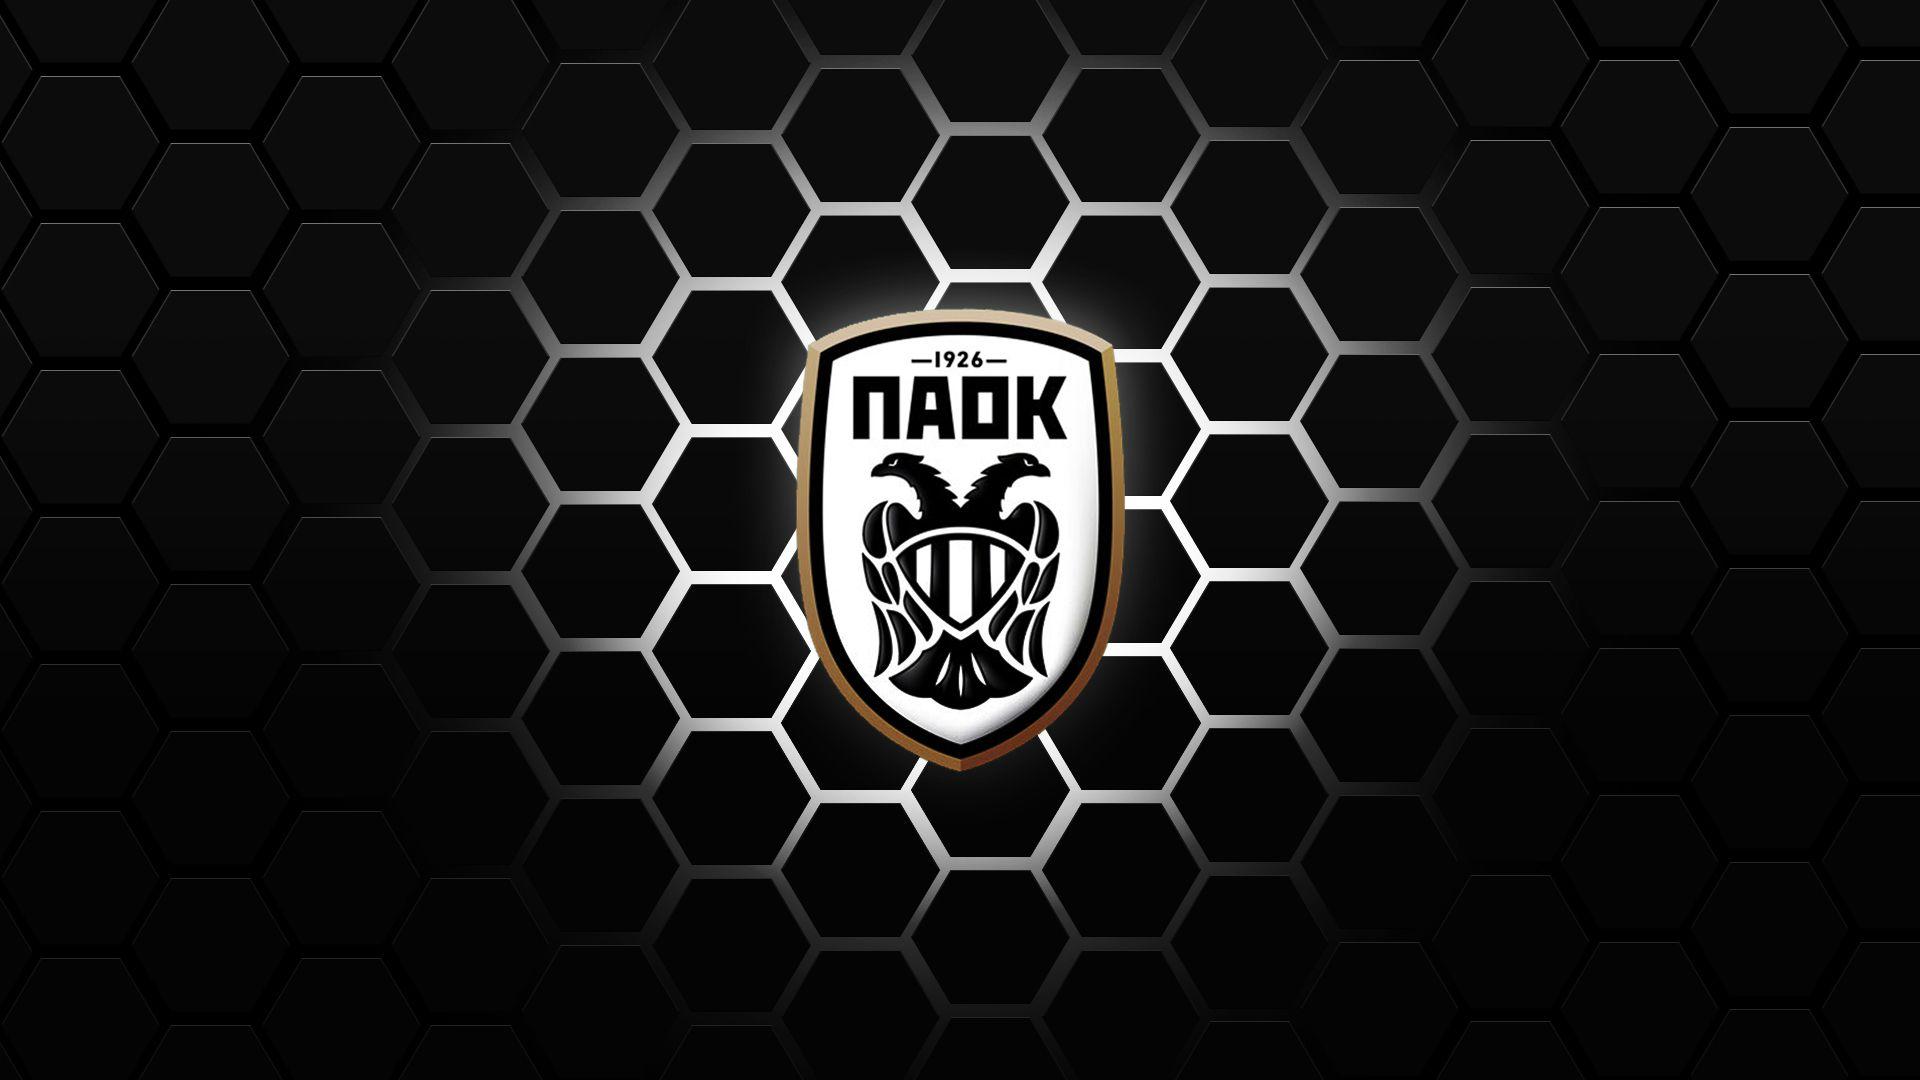 PAOK desktop background PAOK wallpaper Ταπετσαρία ΠΑΟΚ PAOK GATE 4